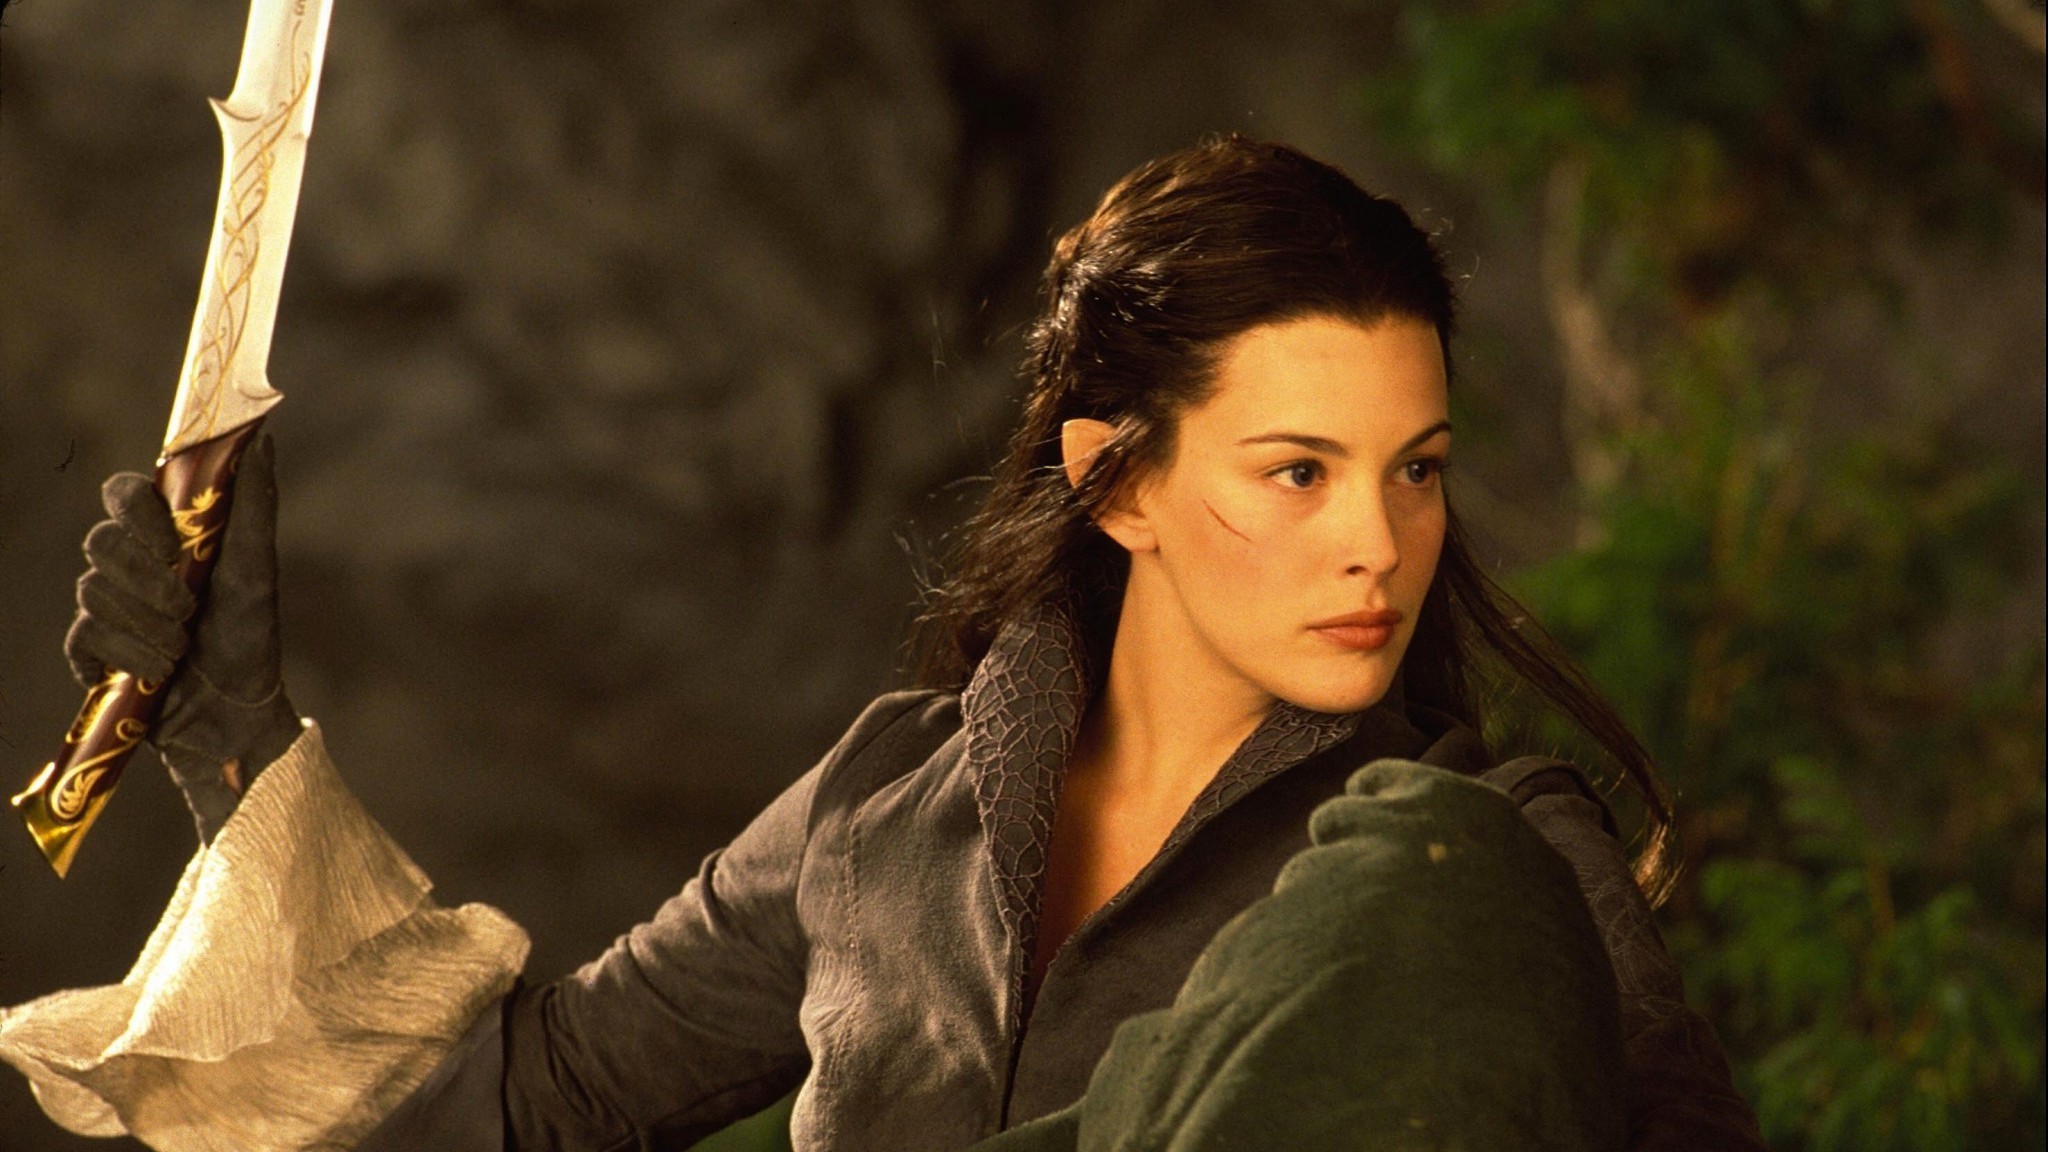 People 2048x1152 Liv Tyler The Lord of the Rings Arwen women actress elves The Lord of the Rings: The Fellowship of the Ring